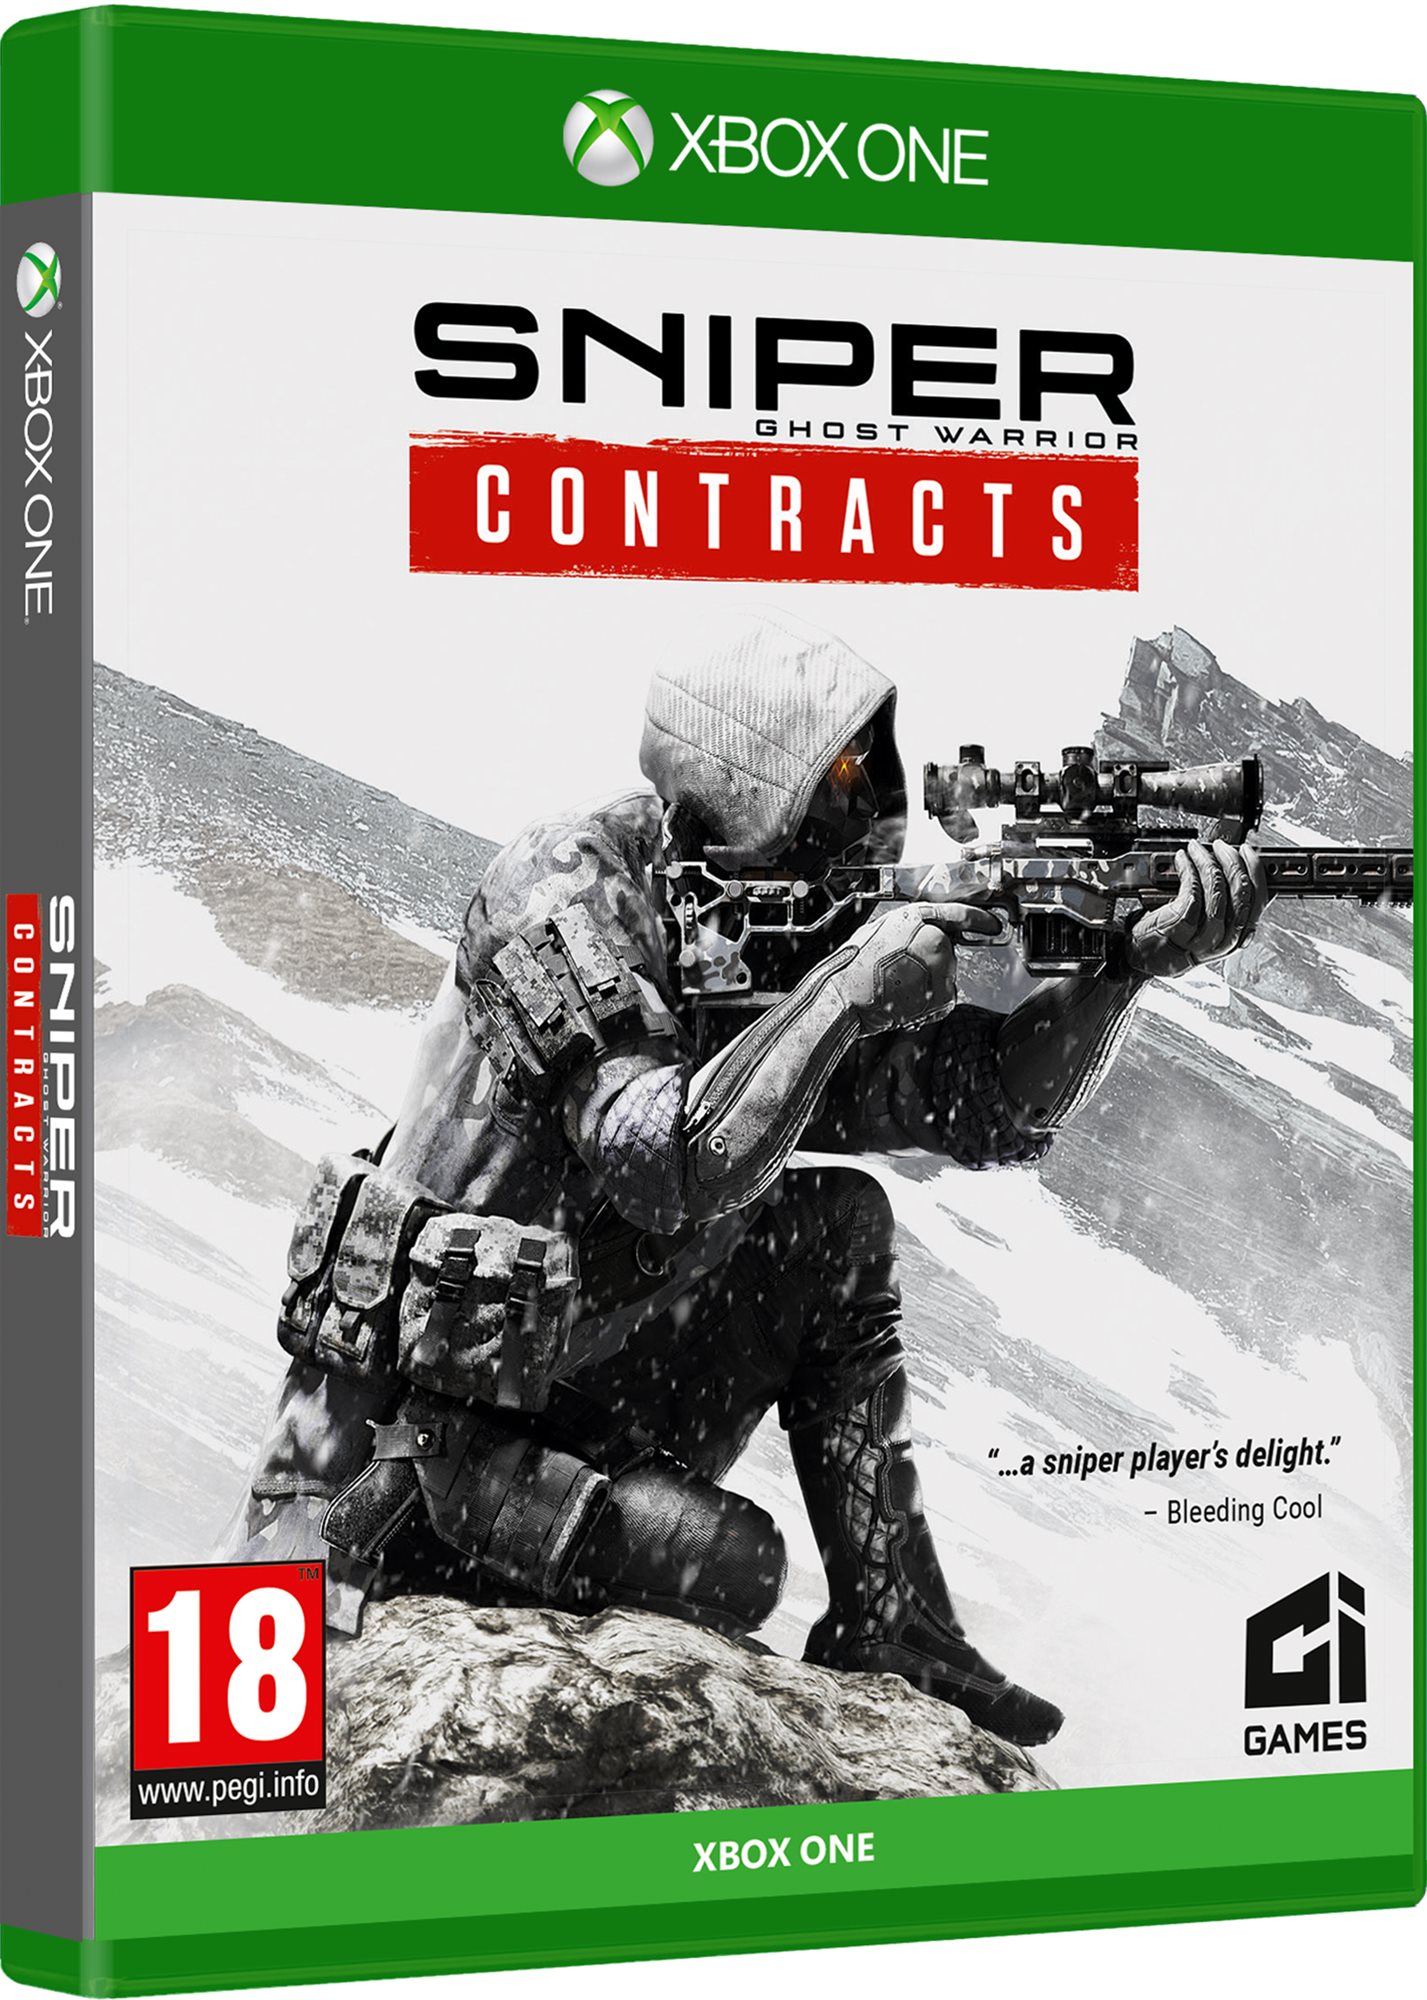 Sniper: Ghost Warrior Contracts - Xbox One, Xbox Series X